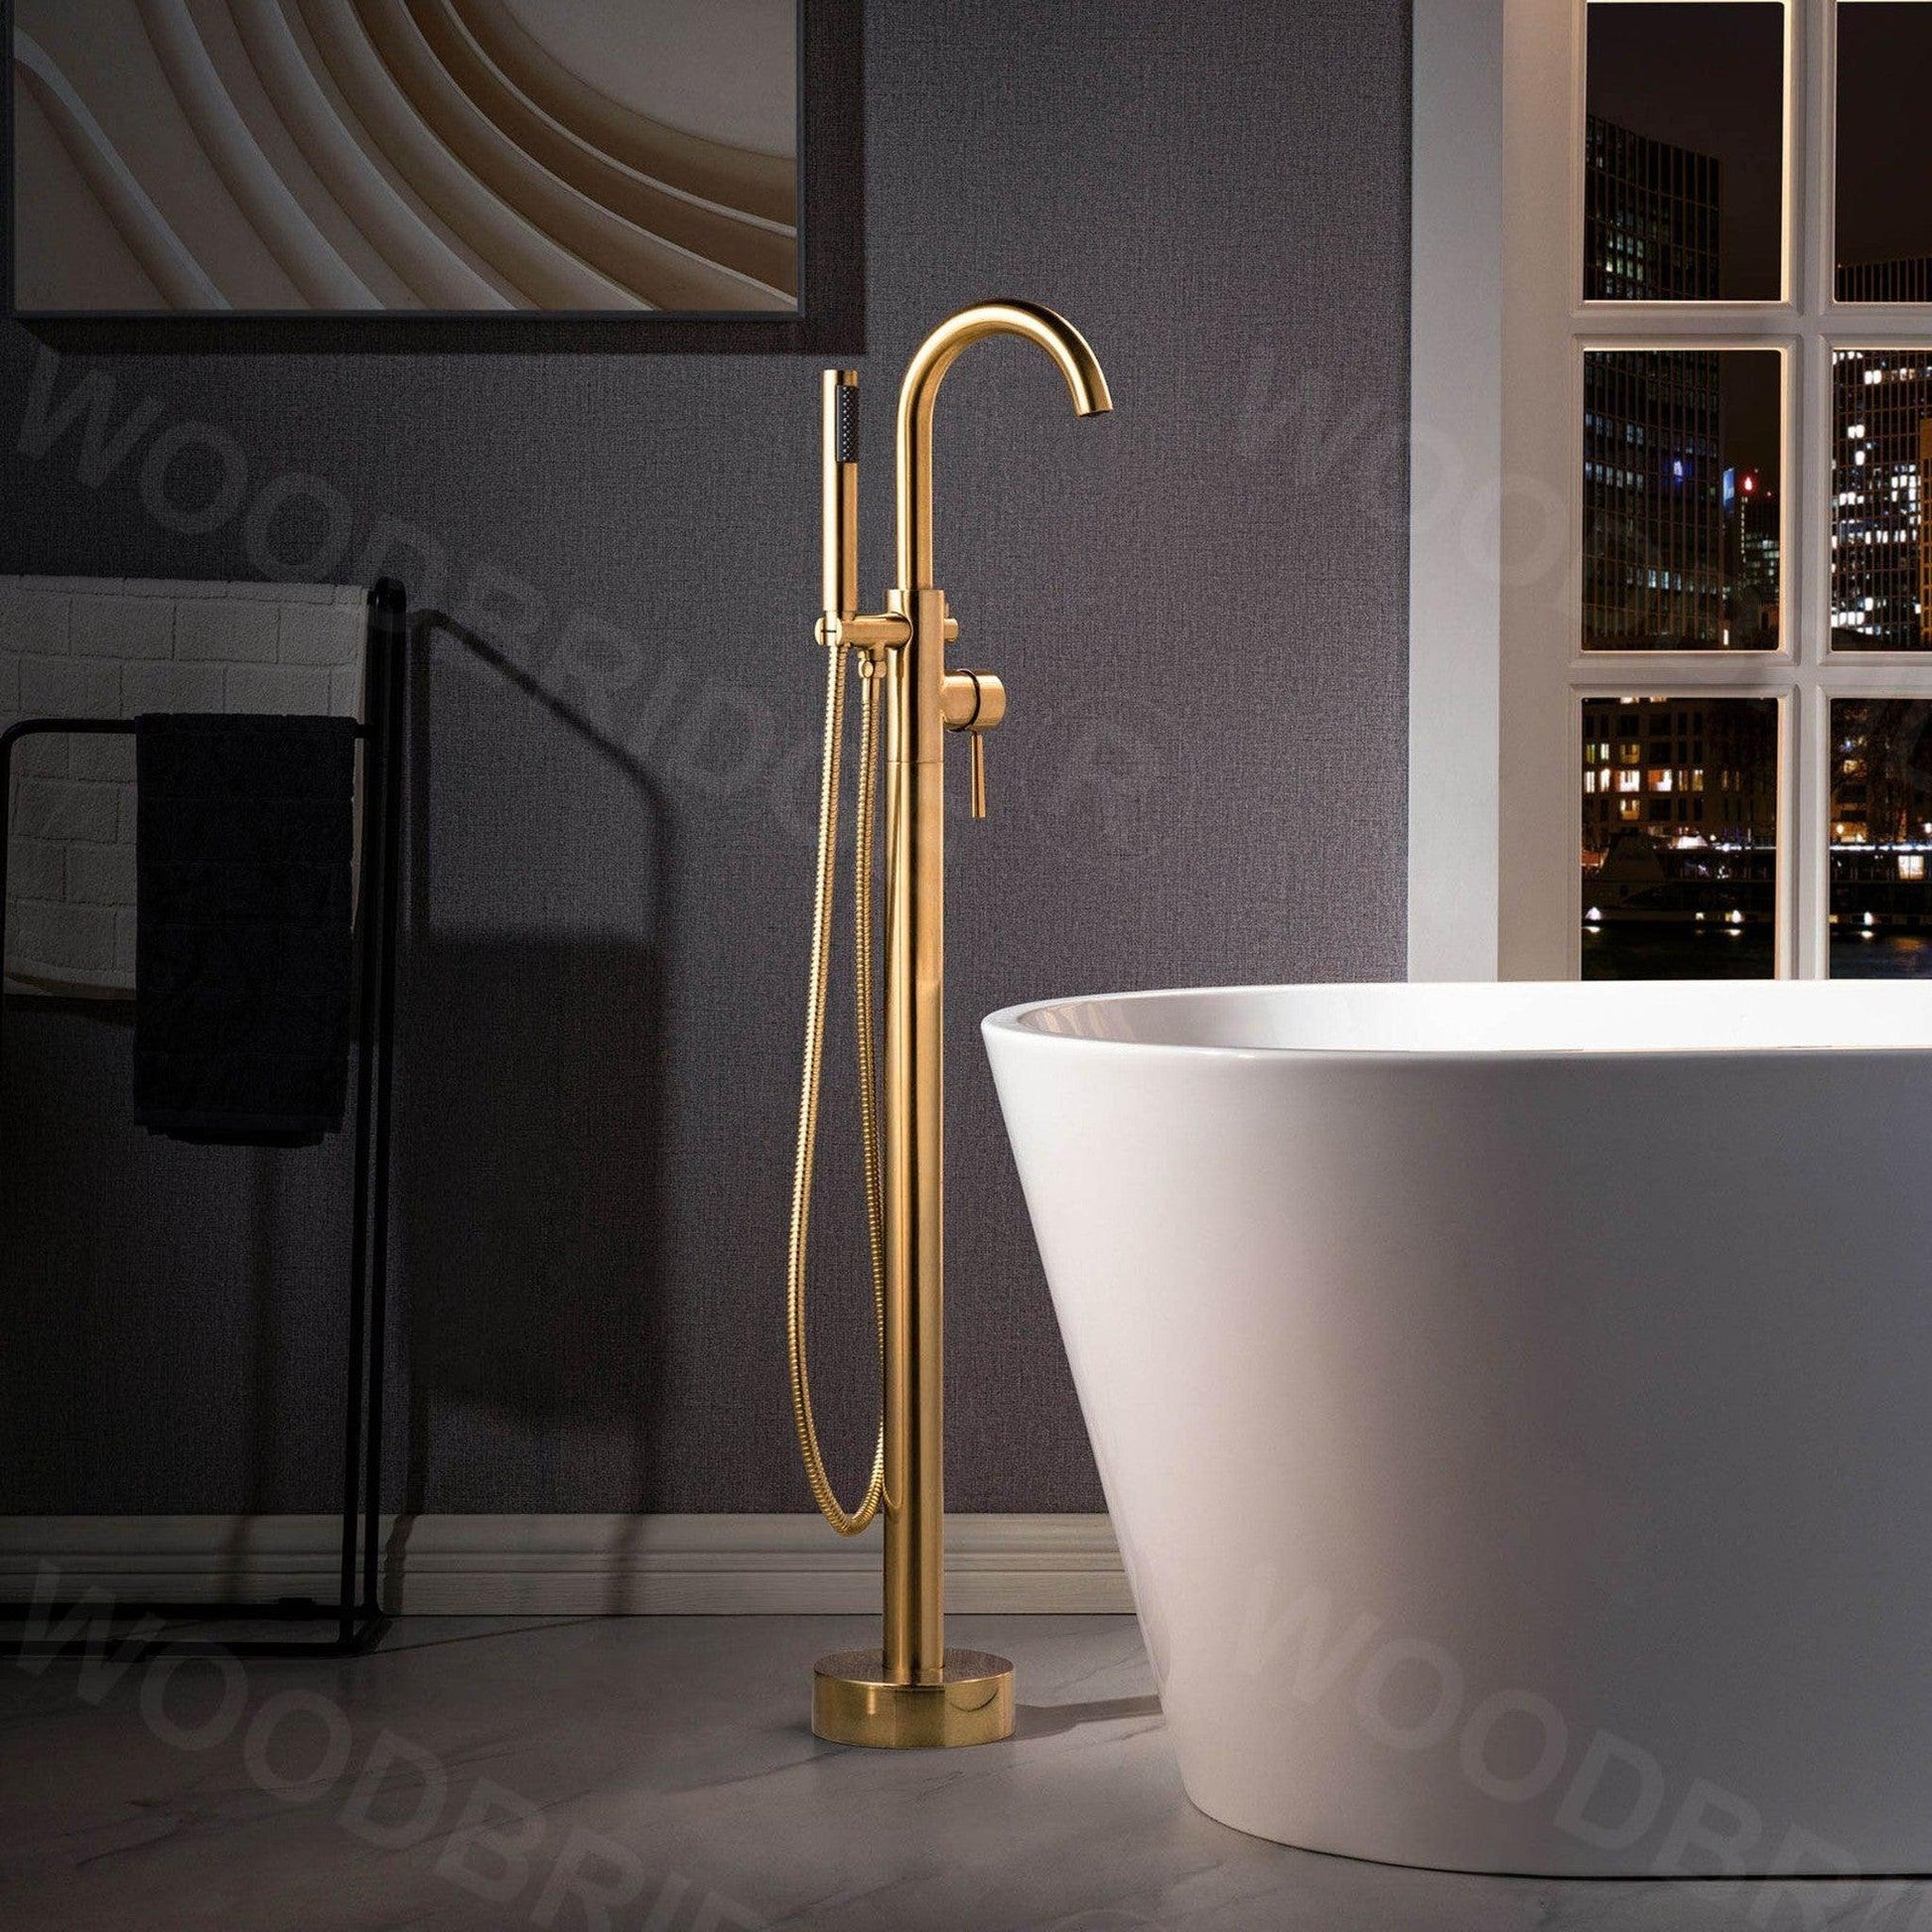 WoodBridge B0064 59" White Acrylic Freestanding Contemporary Soaking Bathtub With Brushed Gold Overflow, Drain, F0026BGRD Tub Filler and Caddy Tray